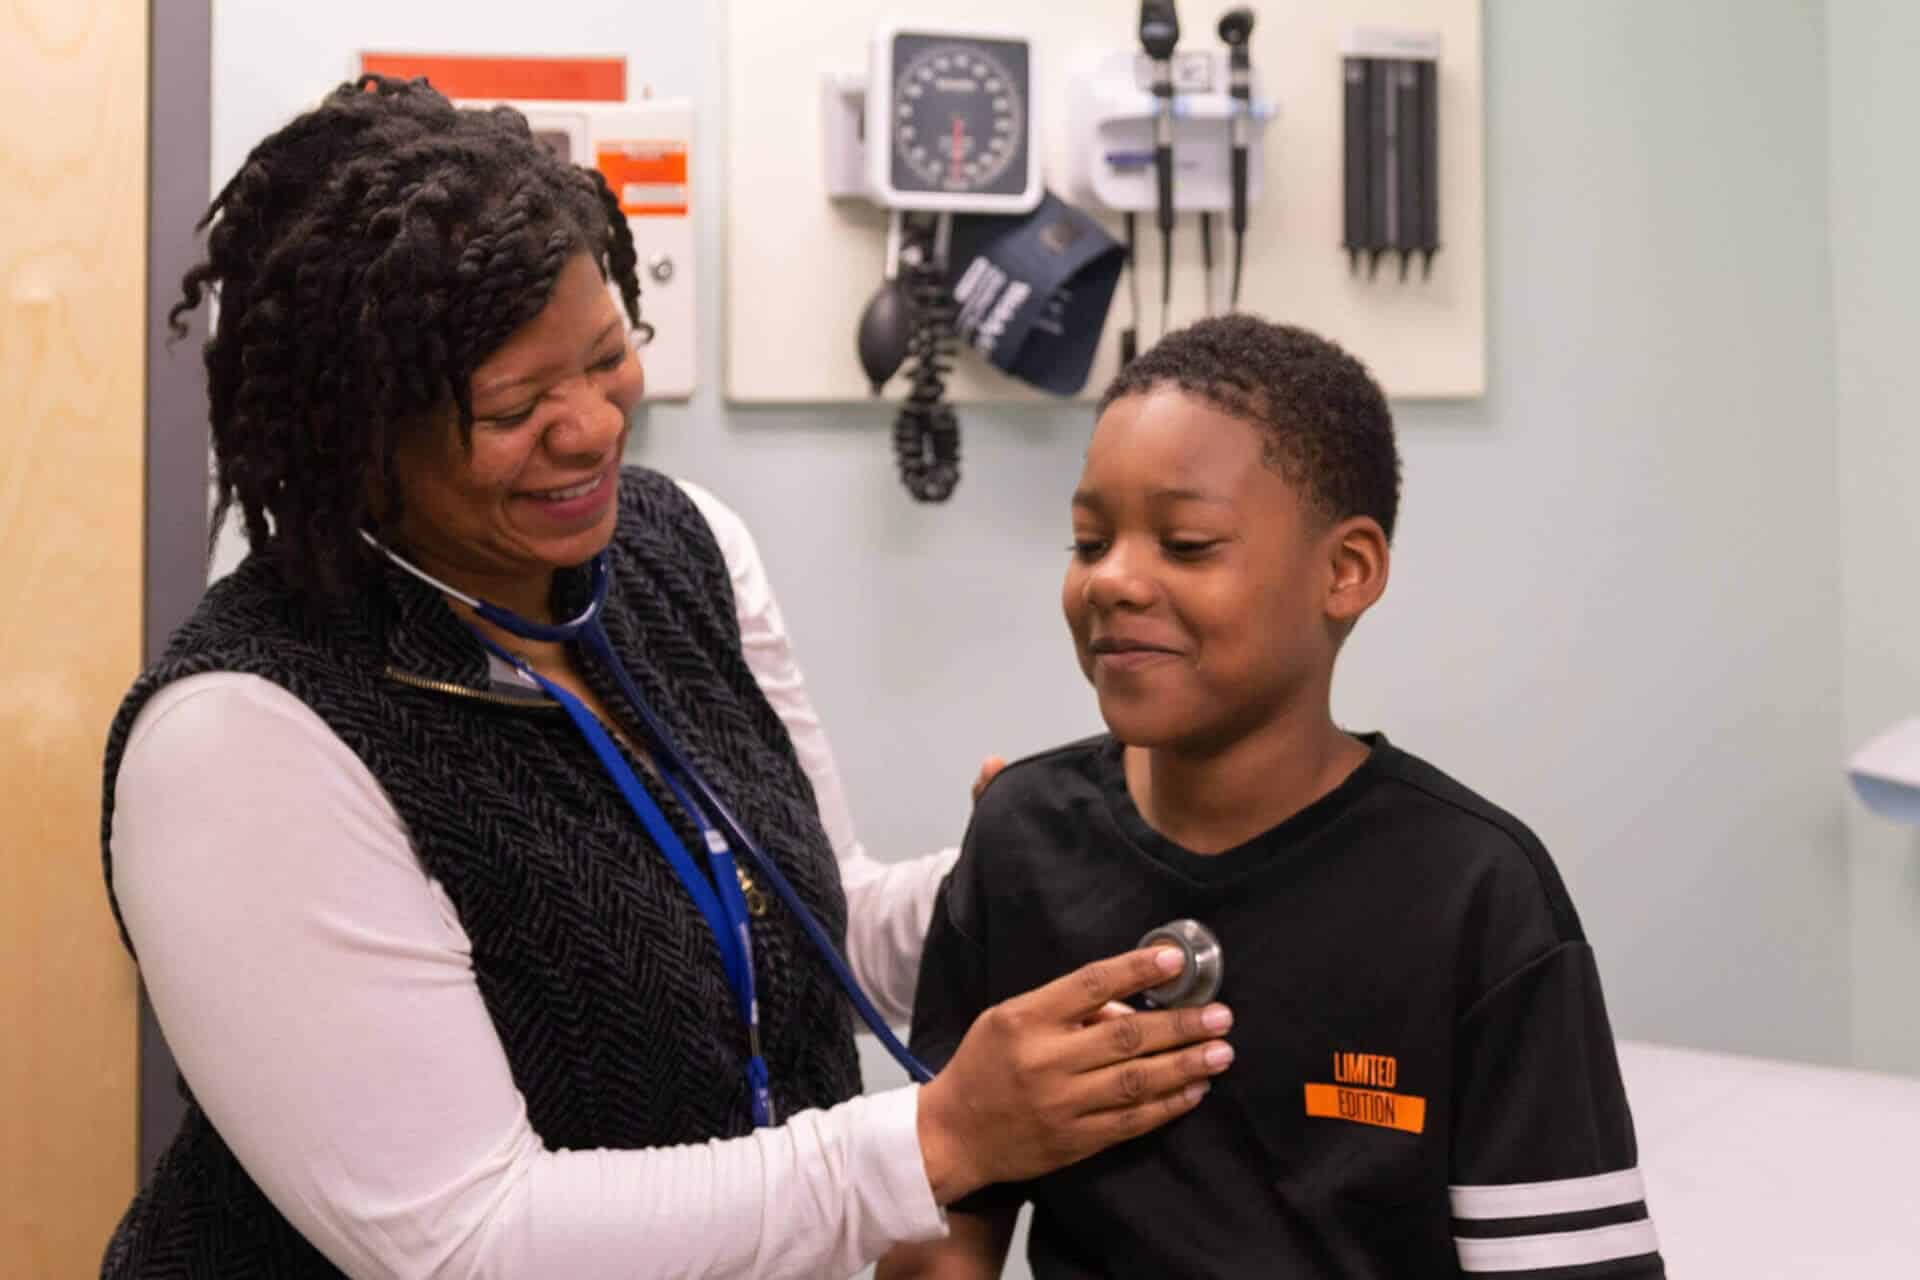 Doctor listening to boy's breathing with stethoscope